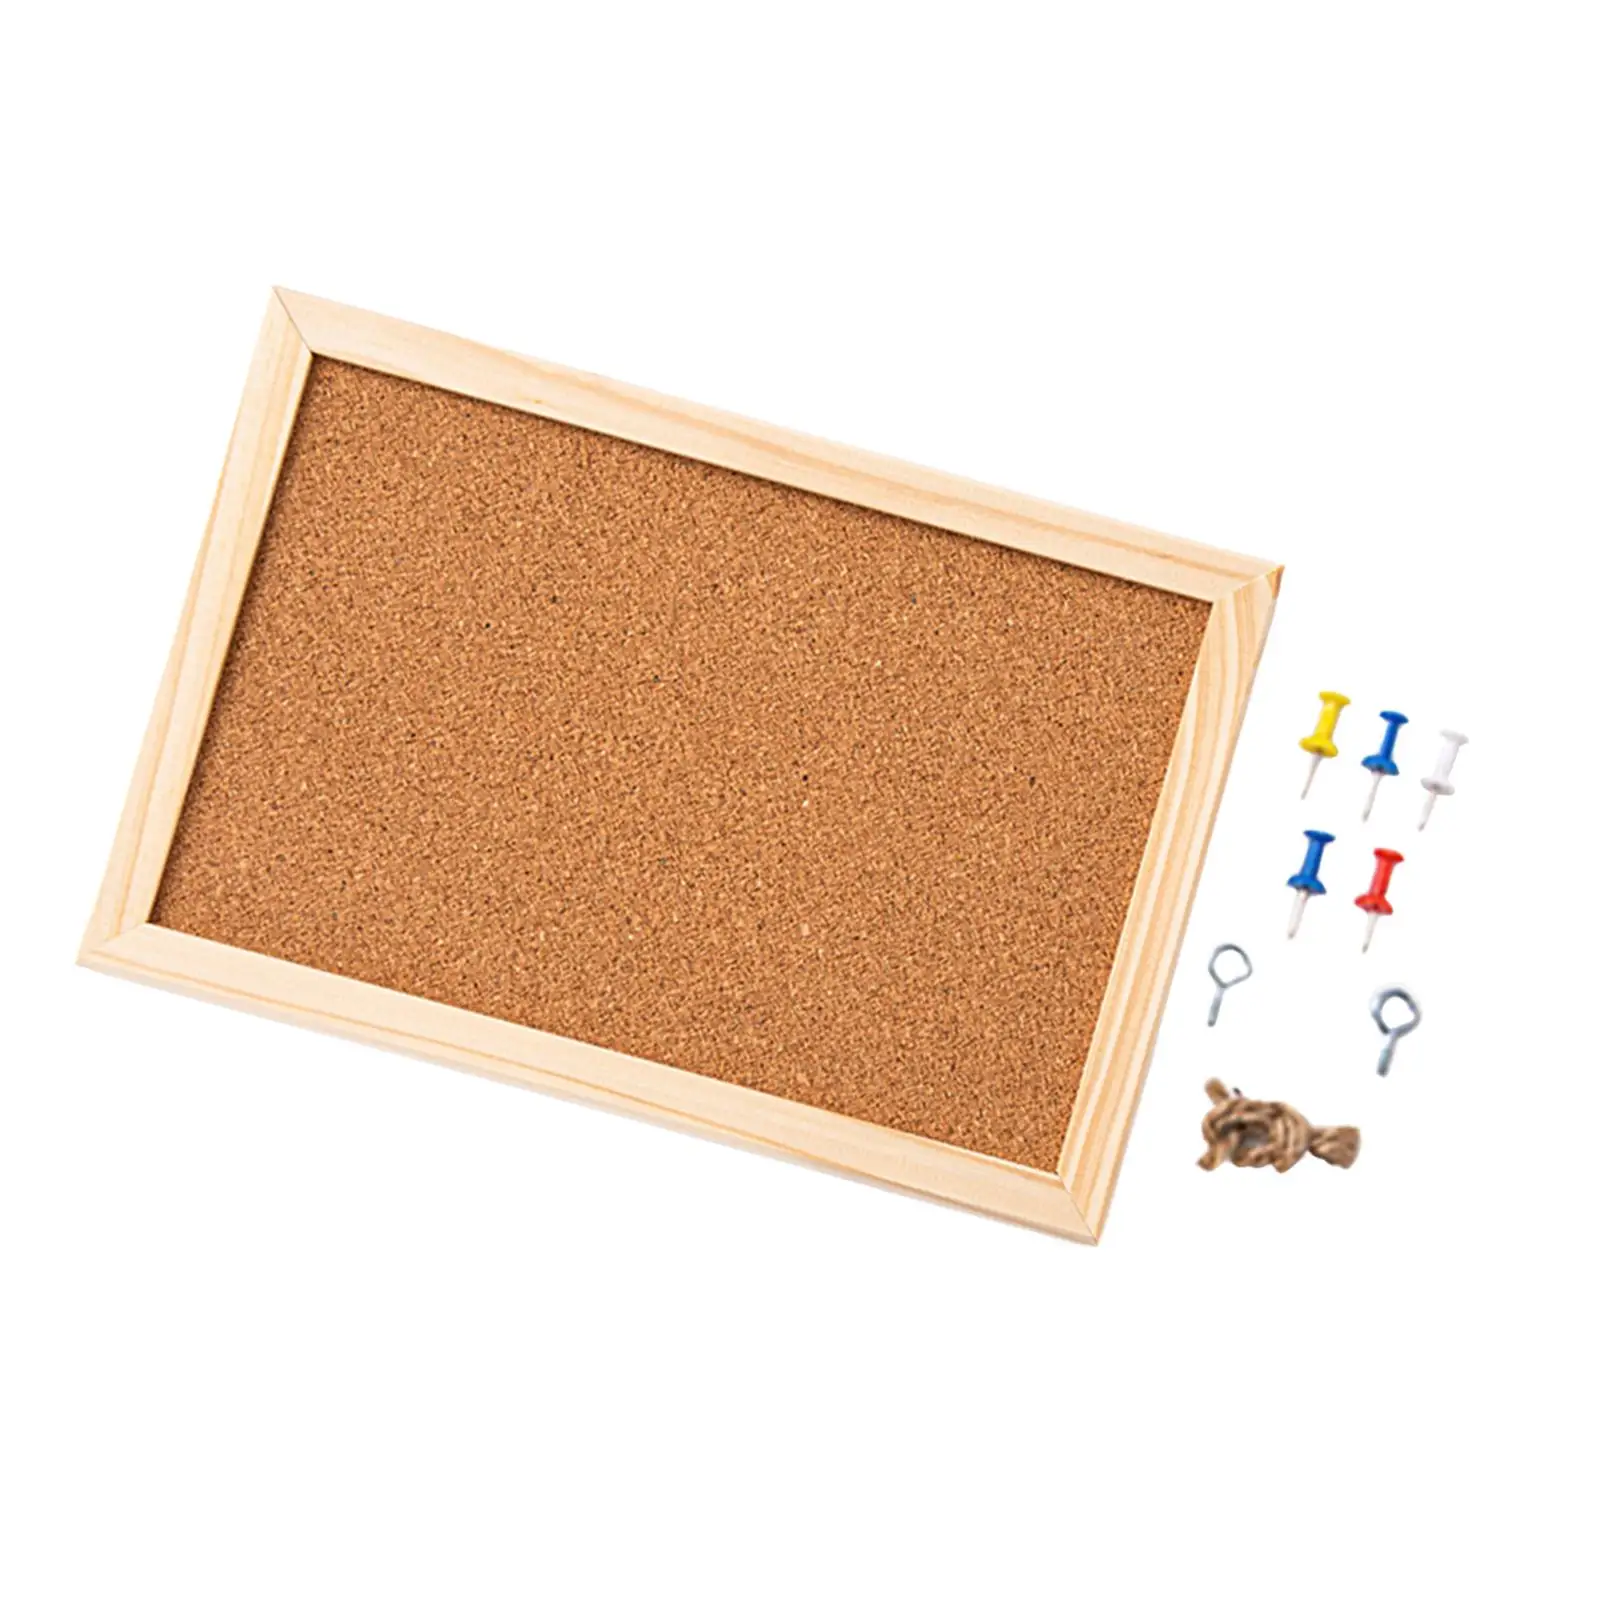 Wooden Bulletin Board House Wall Decor Photo Display Board Hanging Home Office Memo Notes Vision Board Corkboard with Pushpin